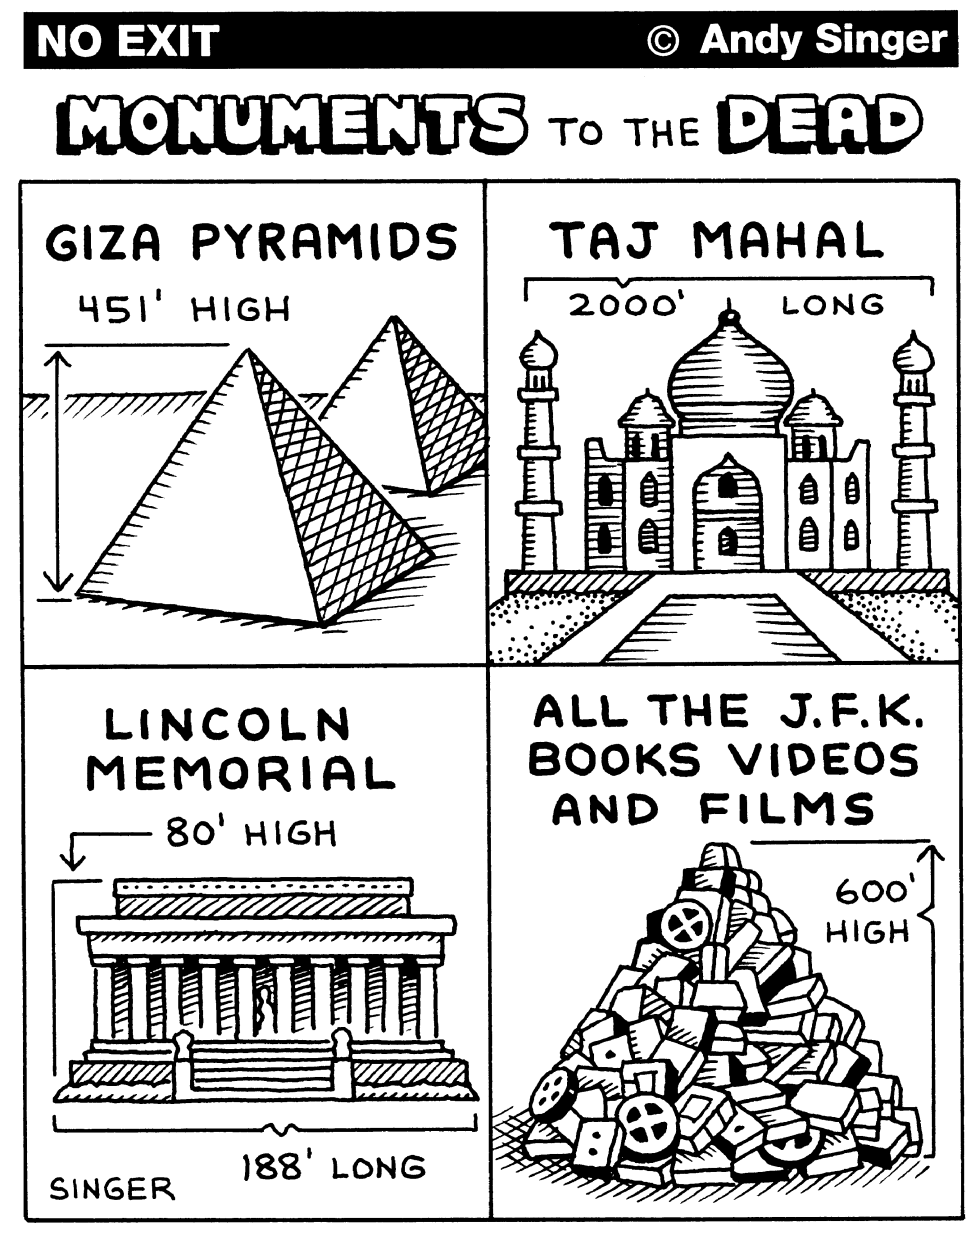 MONUMENTS TO THE DEAD by Andy Singer